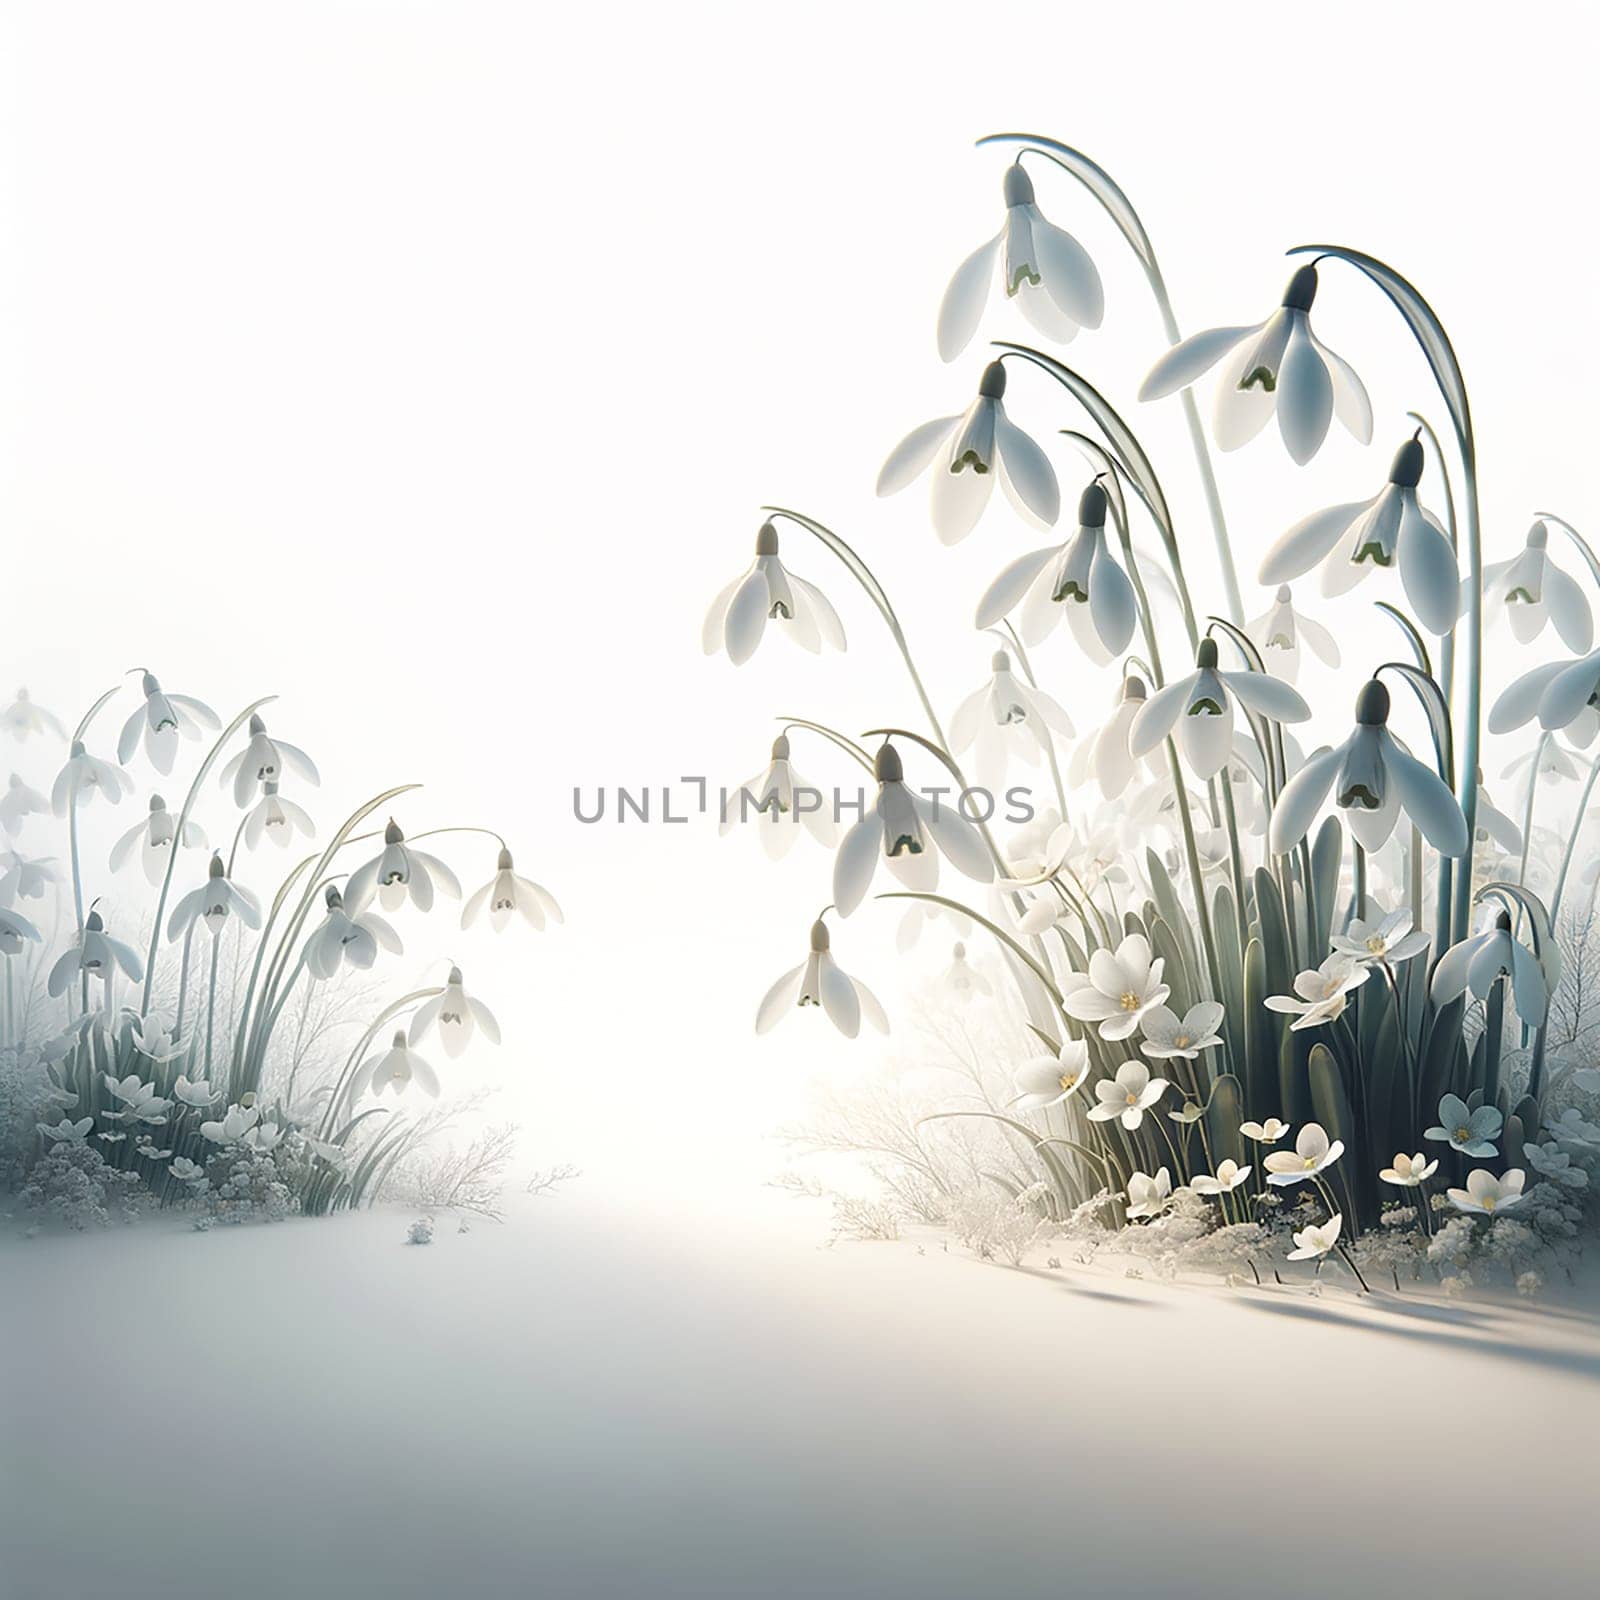 Greeting Spring: Tranquil Snowdrops Blossom on White Background